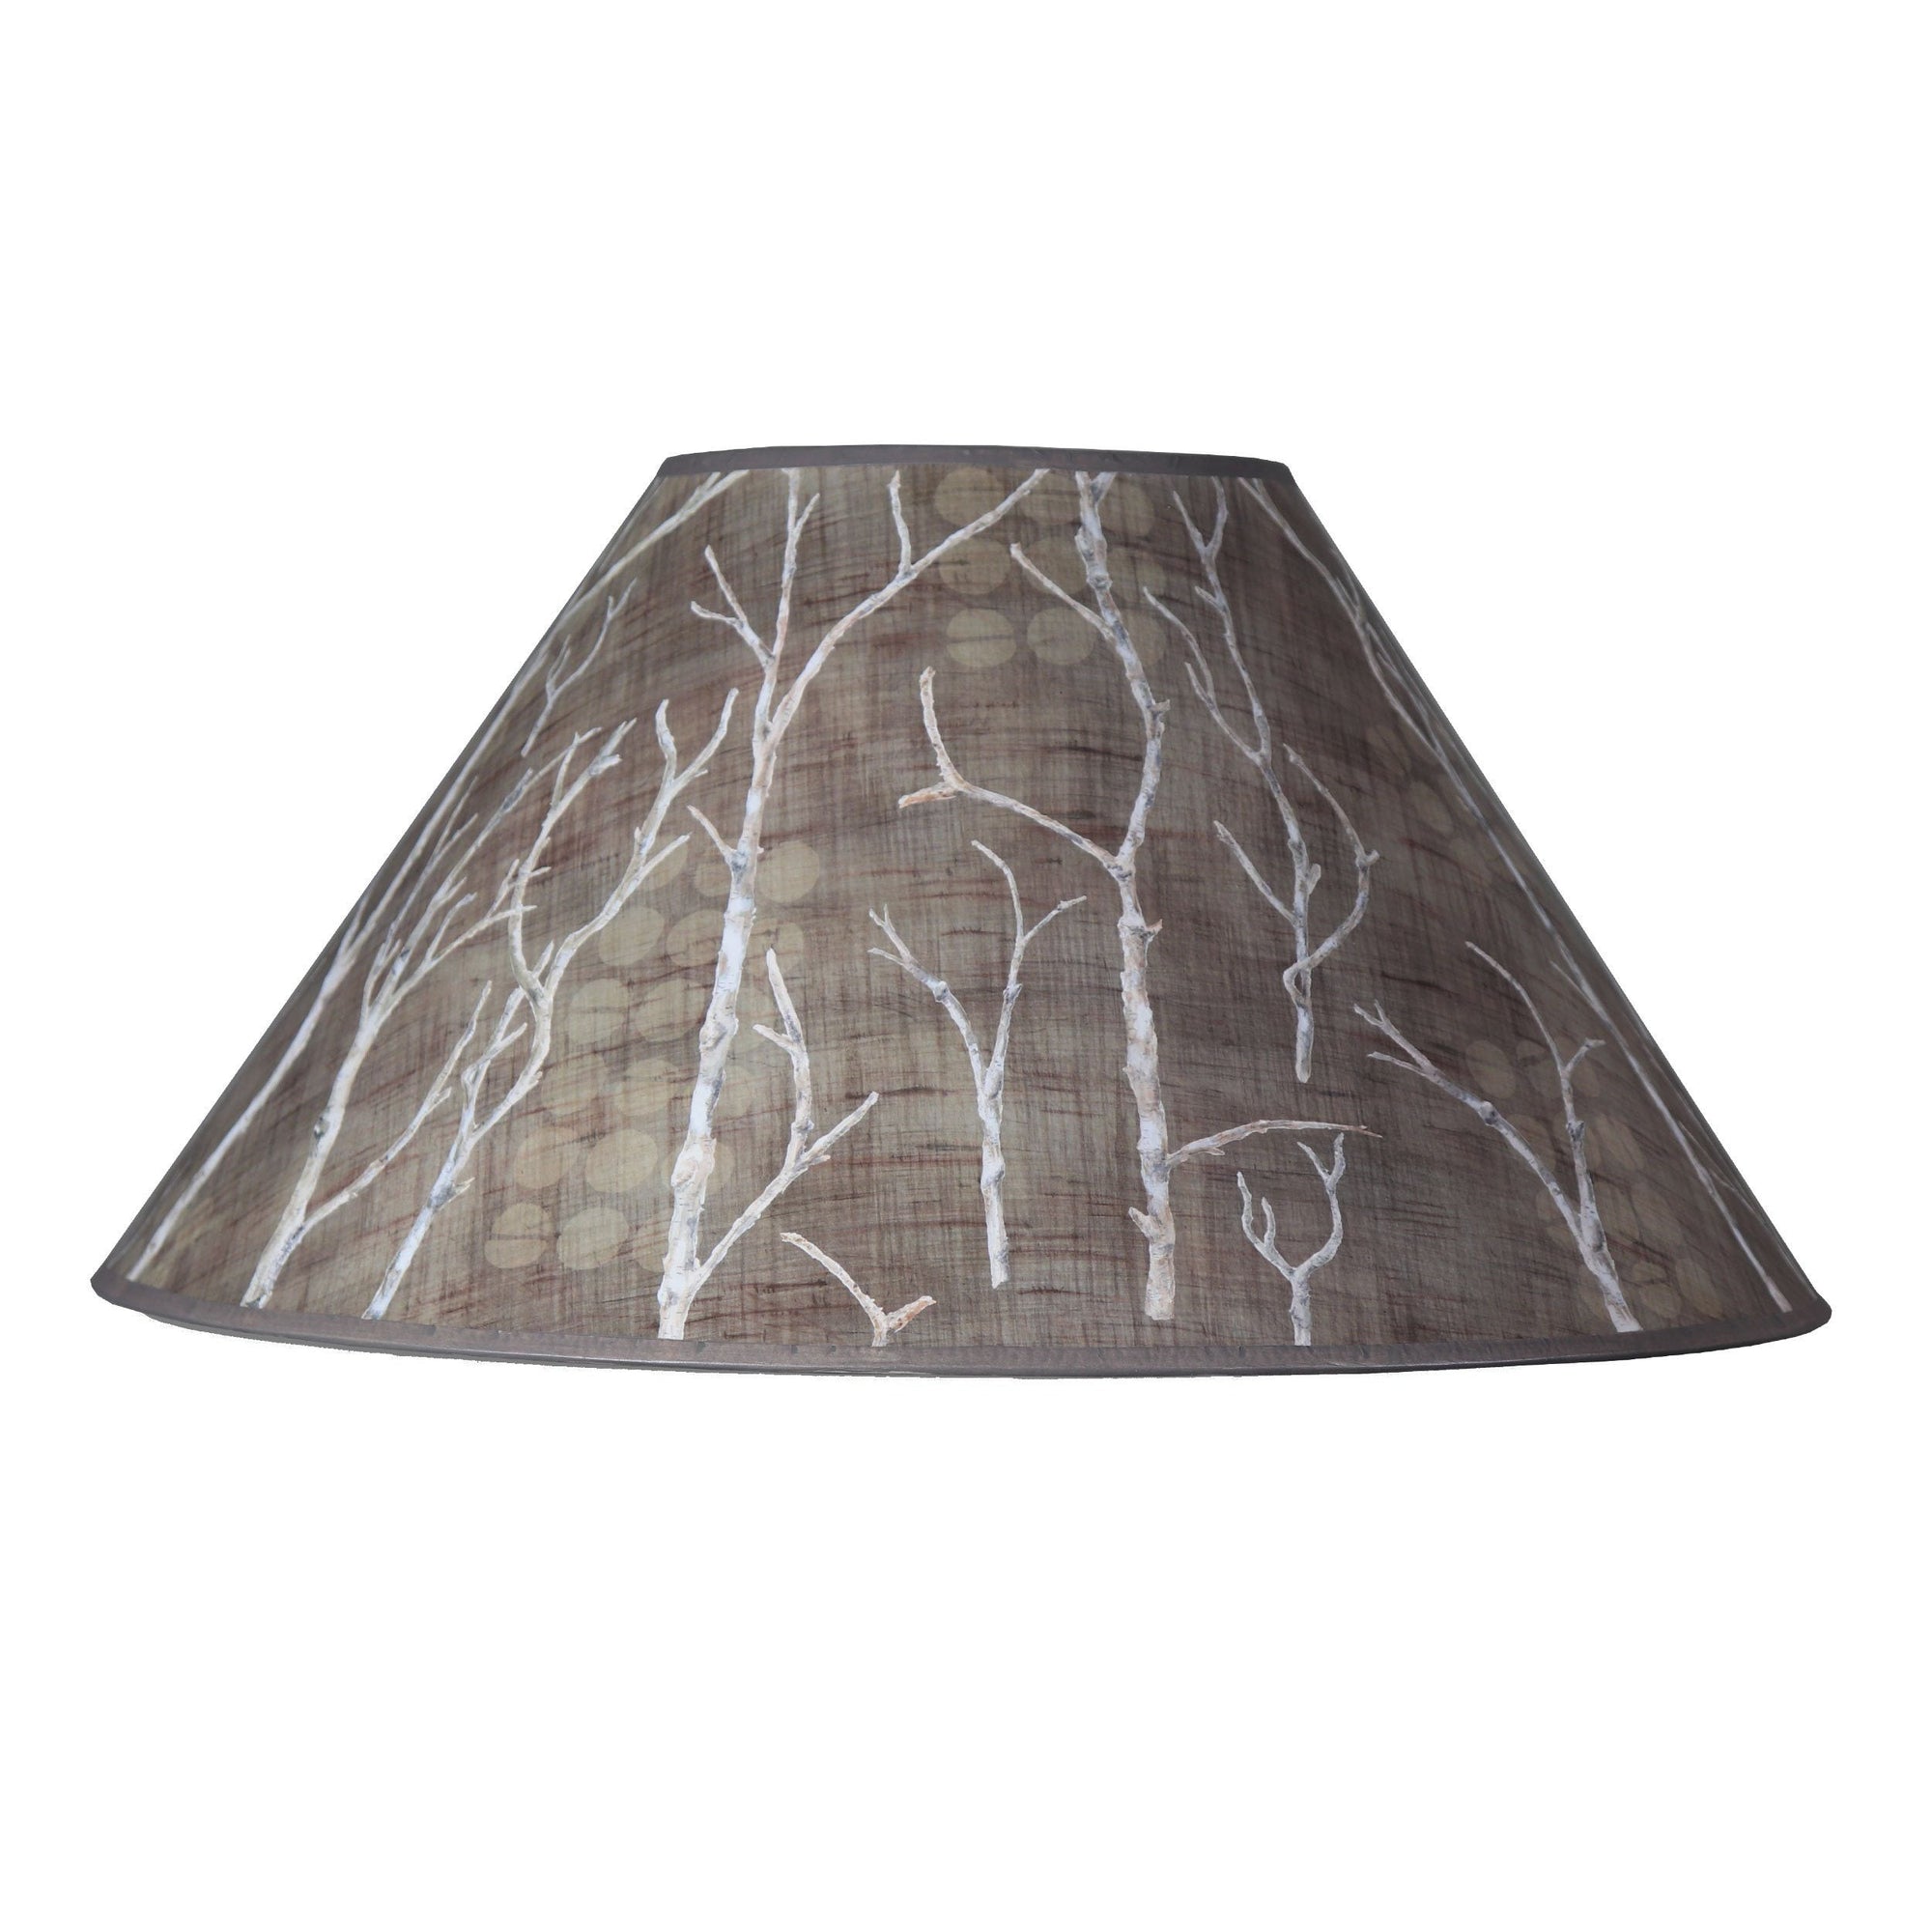 Janna Ugone & Co Lamp Shades Large Conical Lamp Shade in Twigs